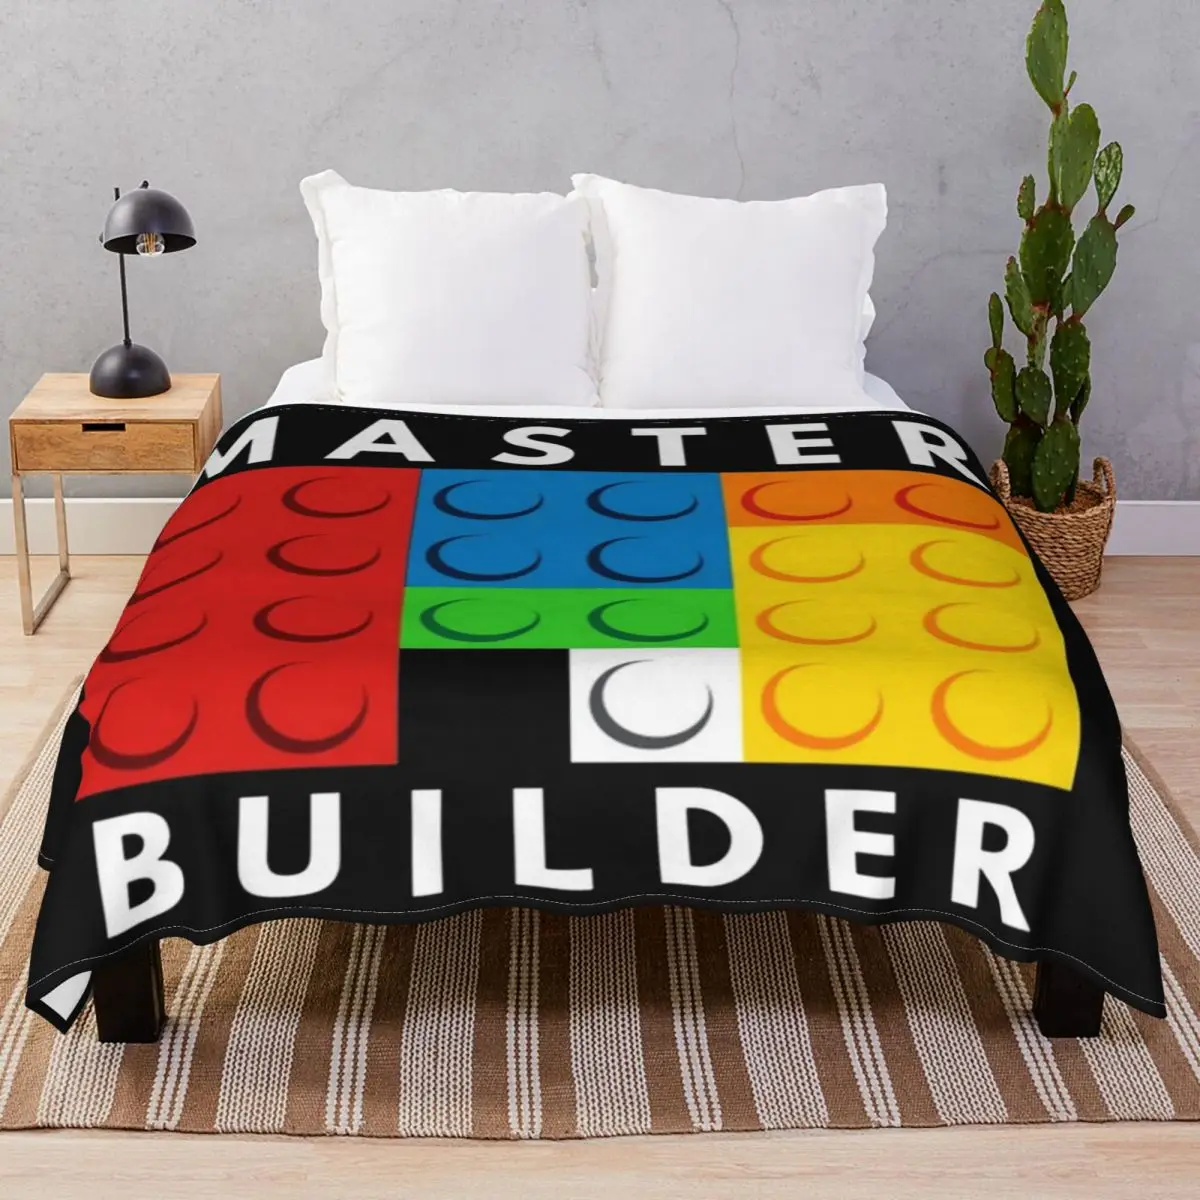 Master Builder Blankets Fleece Print Warm Throw Blanket for Bedding Home Couch Travel Office